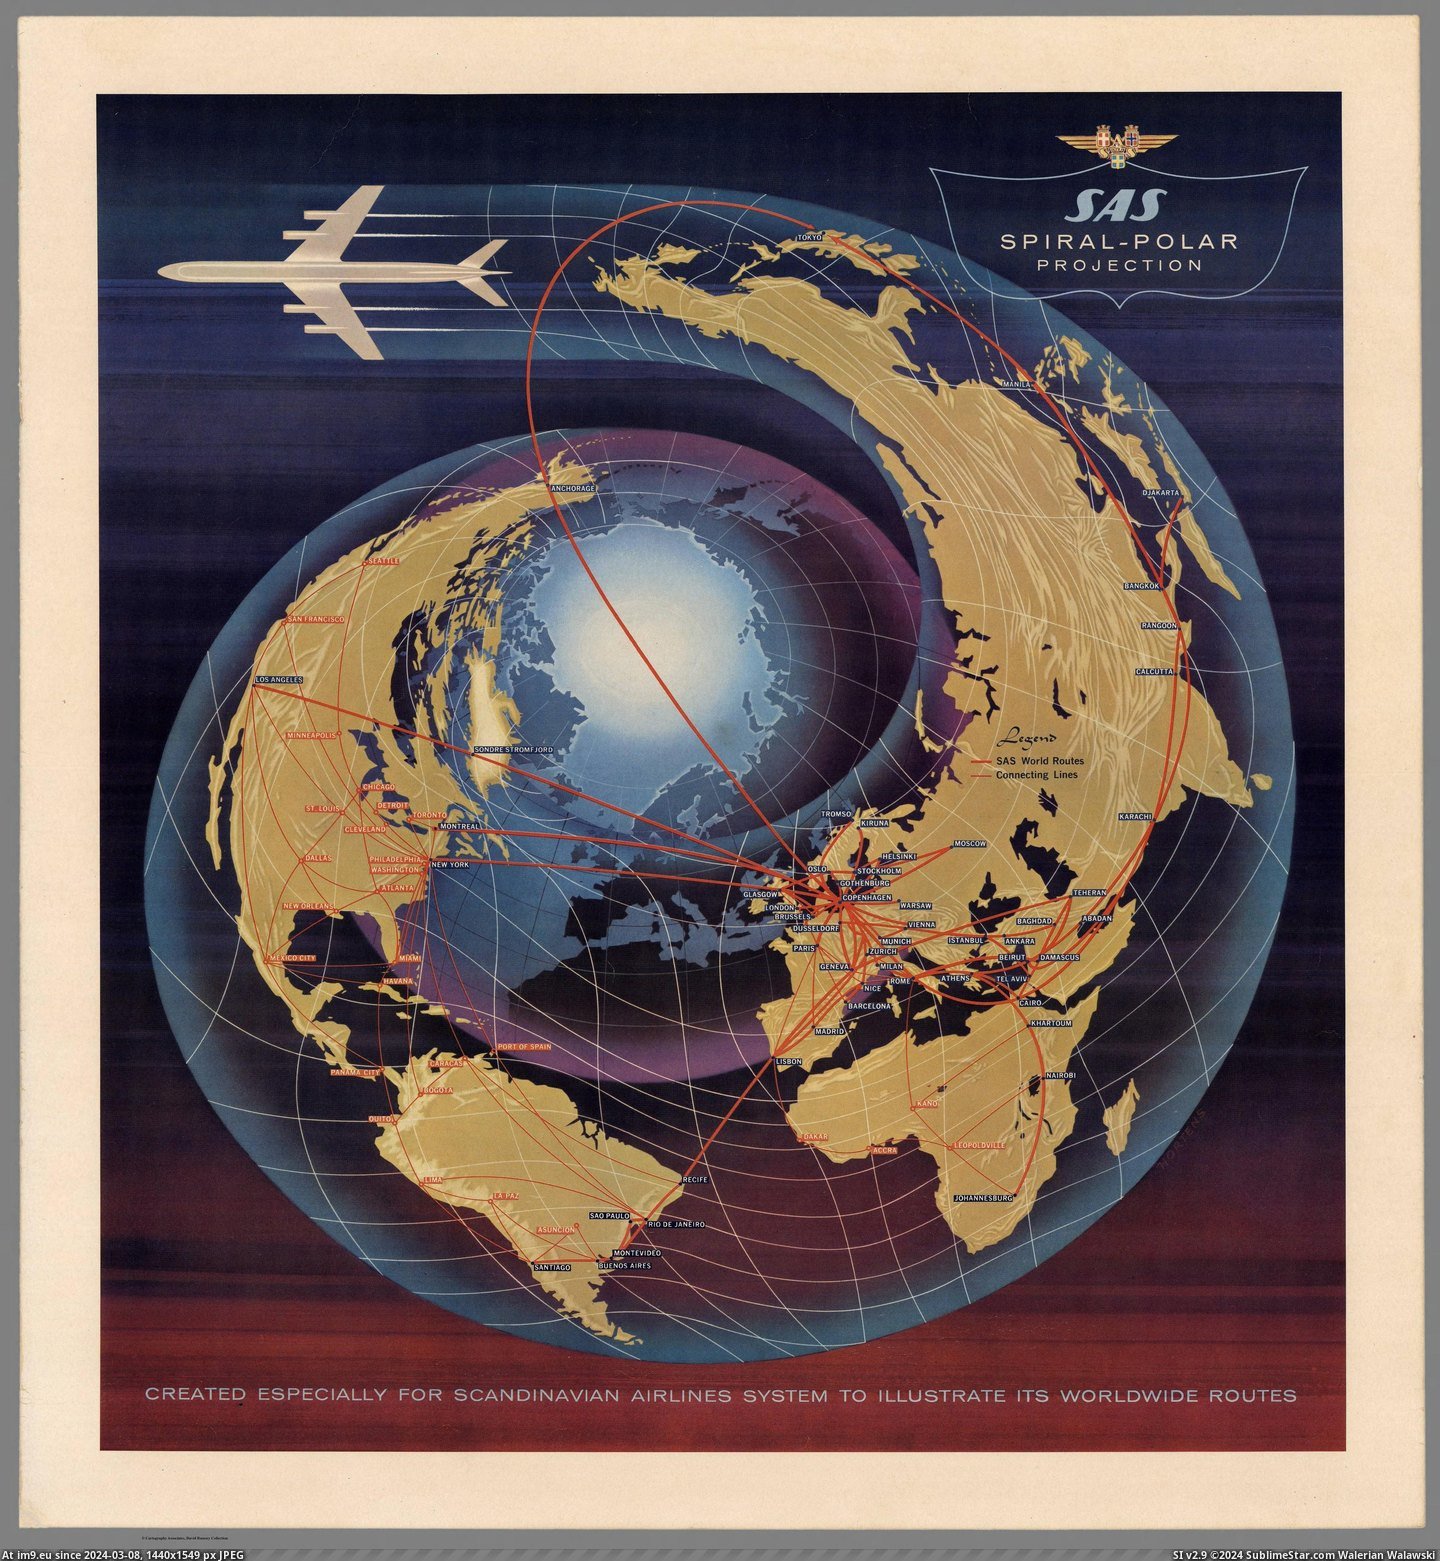 #System #Created #Polar #Worldwide #Illustrate #Scandinavian #Sas #Routes #Projection #Airlines #Spiral [Mapporn] SAS Spiral-Polar Projection. Created Especially for Scandinavian Airlines System to Illustrate Its Worldwide Routes. [ Pic. (Изображение из альбом My r/MAPS favs))